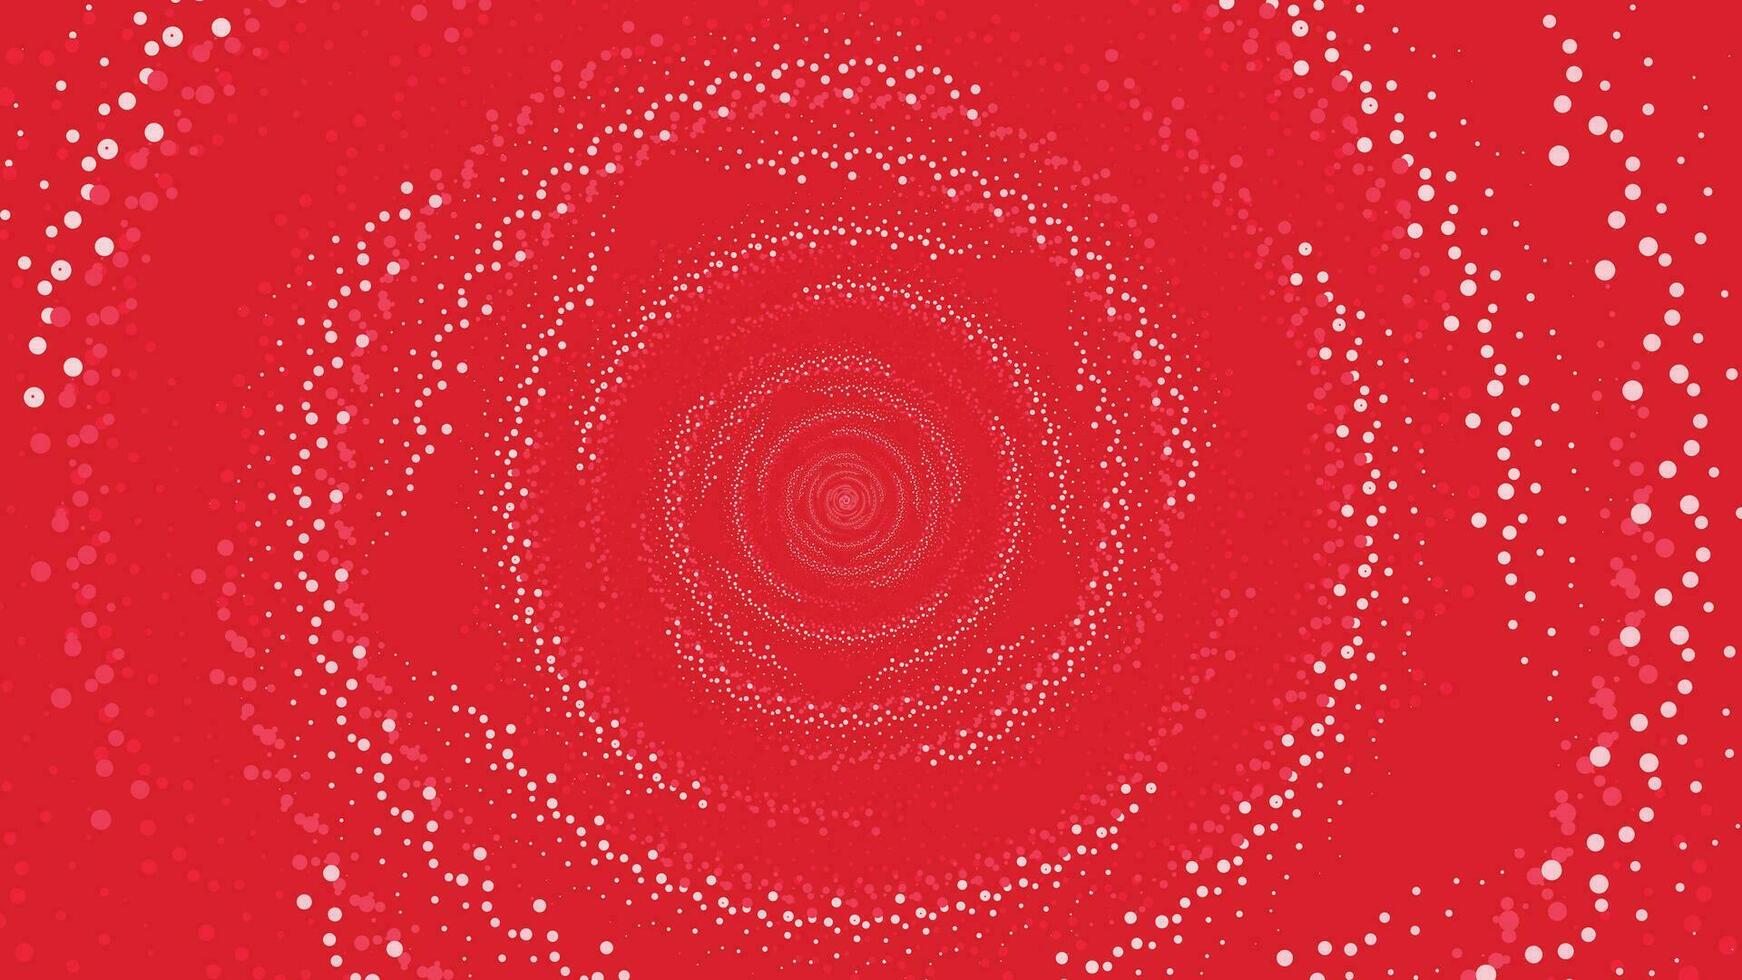 Abstract spiral mandala design style Christmas background for your creative project. This simple minimalist style background can be used as a banner or logo. This is perfect for web site background. vector